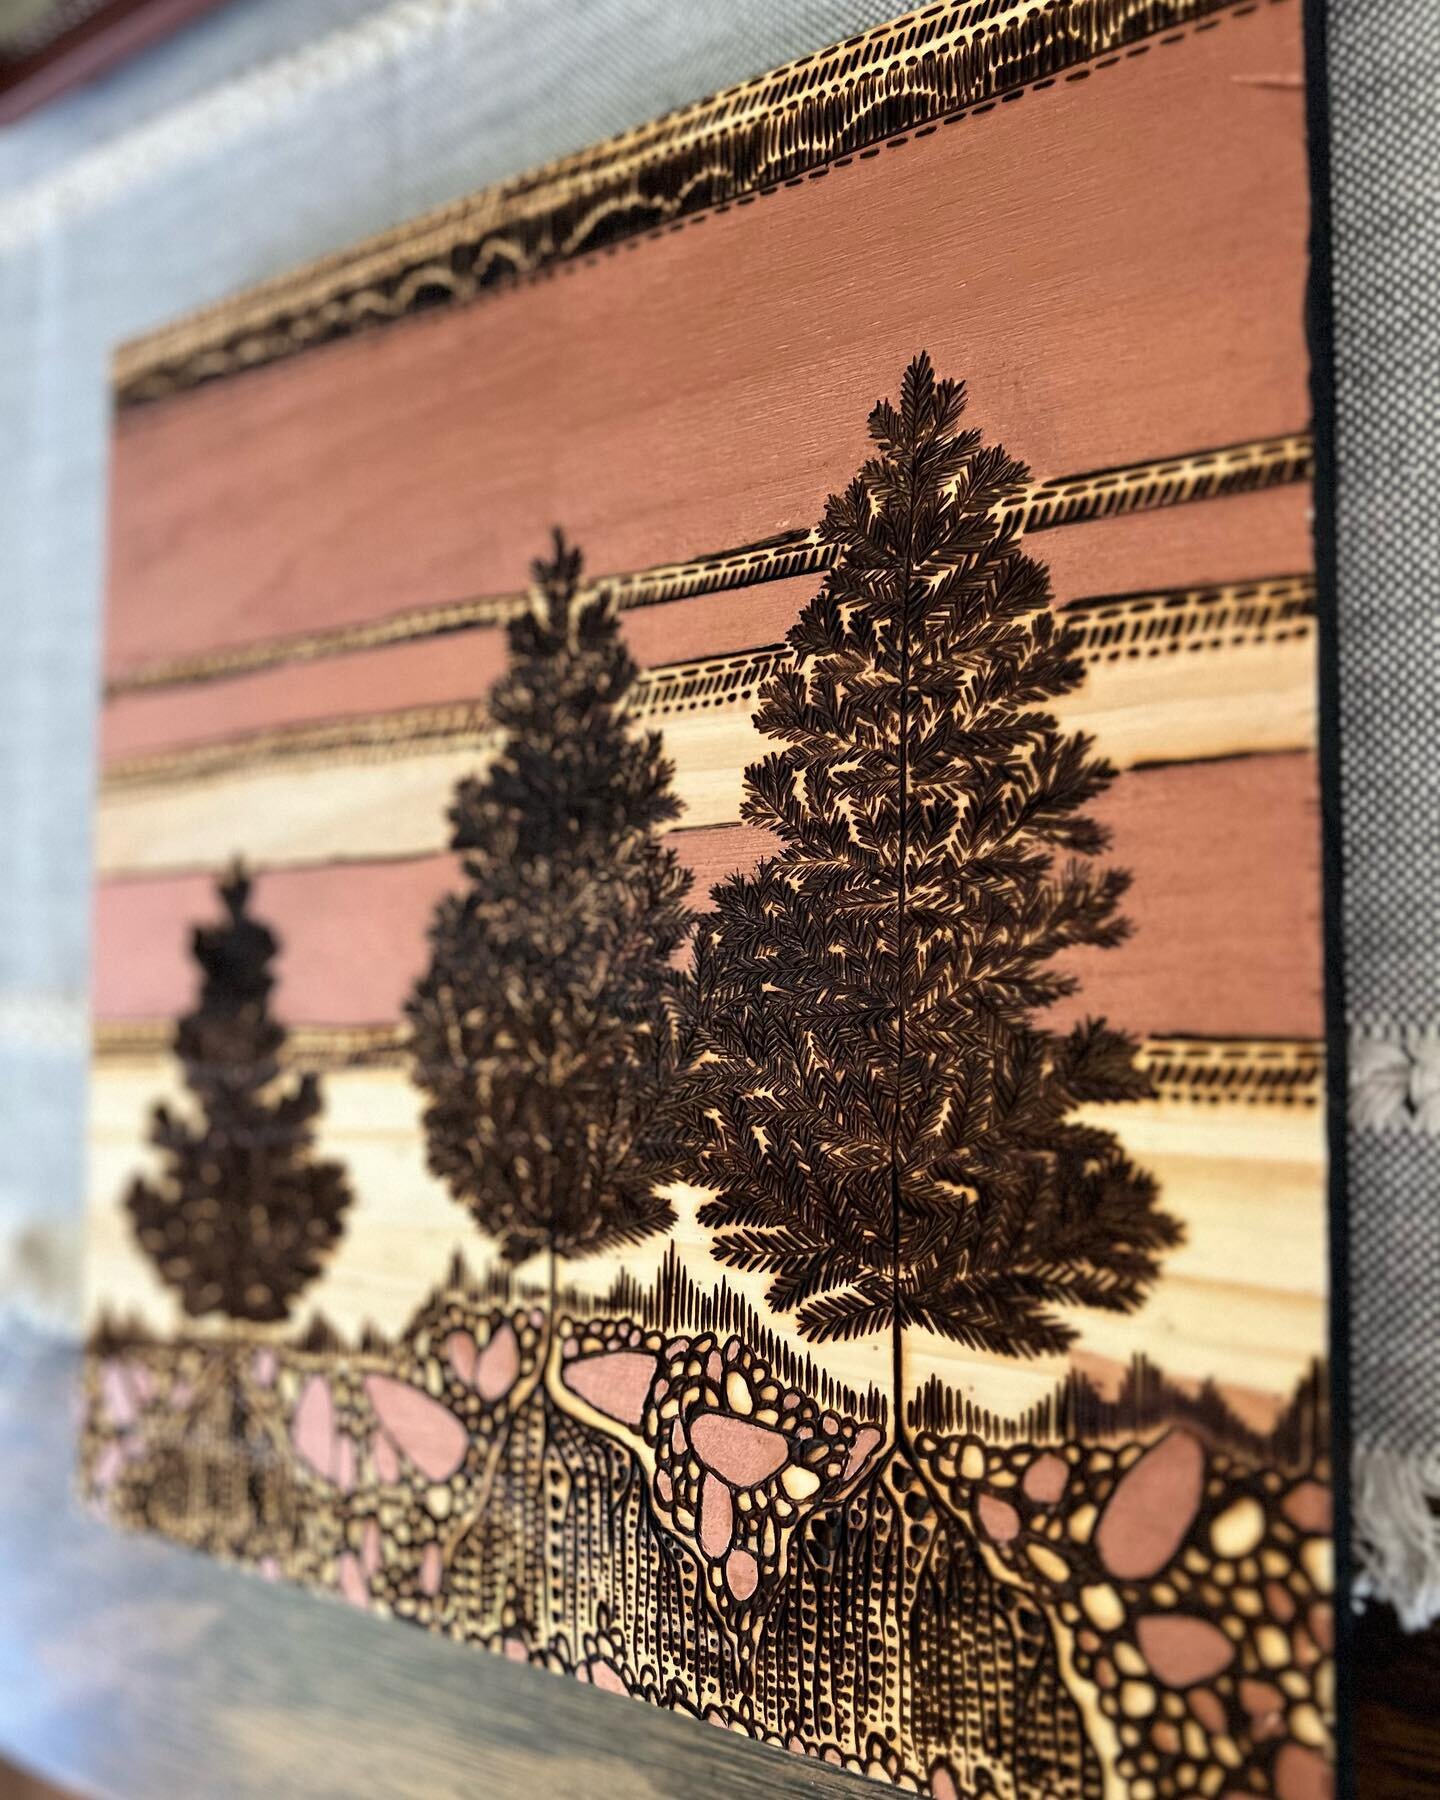 Metallic copper forest moods and a mini rant about walking away. &hearts;️👇

I&rsquo;ve been taking my sweet time lately, and playing around a lot with the magic that comes from a bit of metallic paint in a wild landscape. The way the sunlight hits 